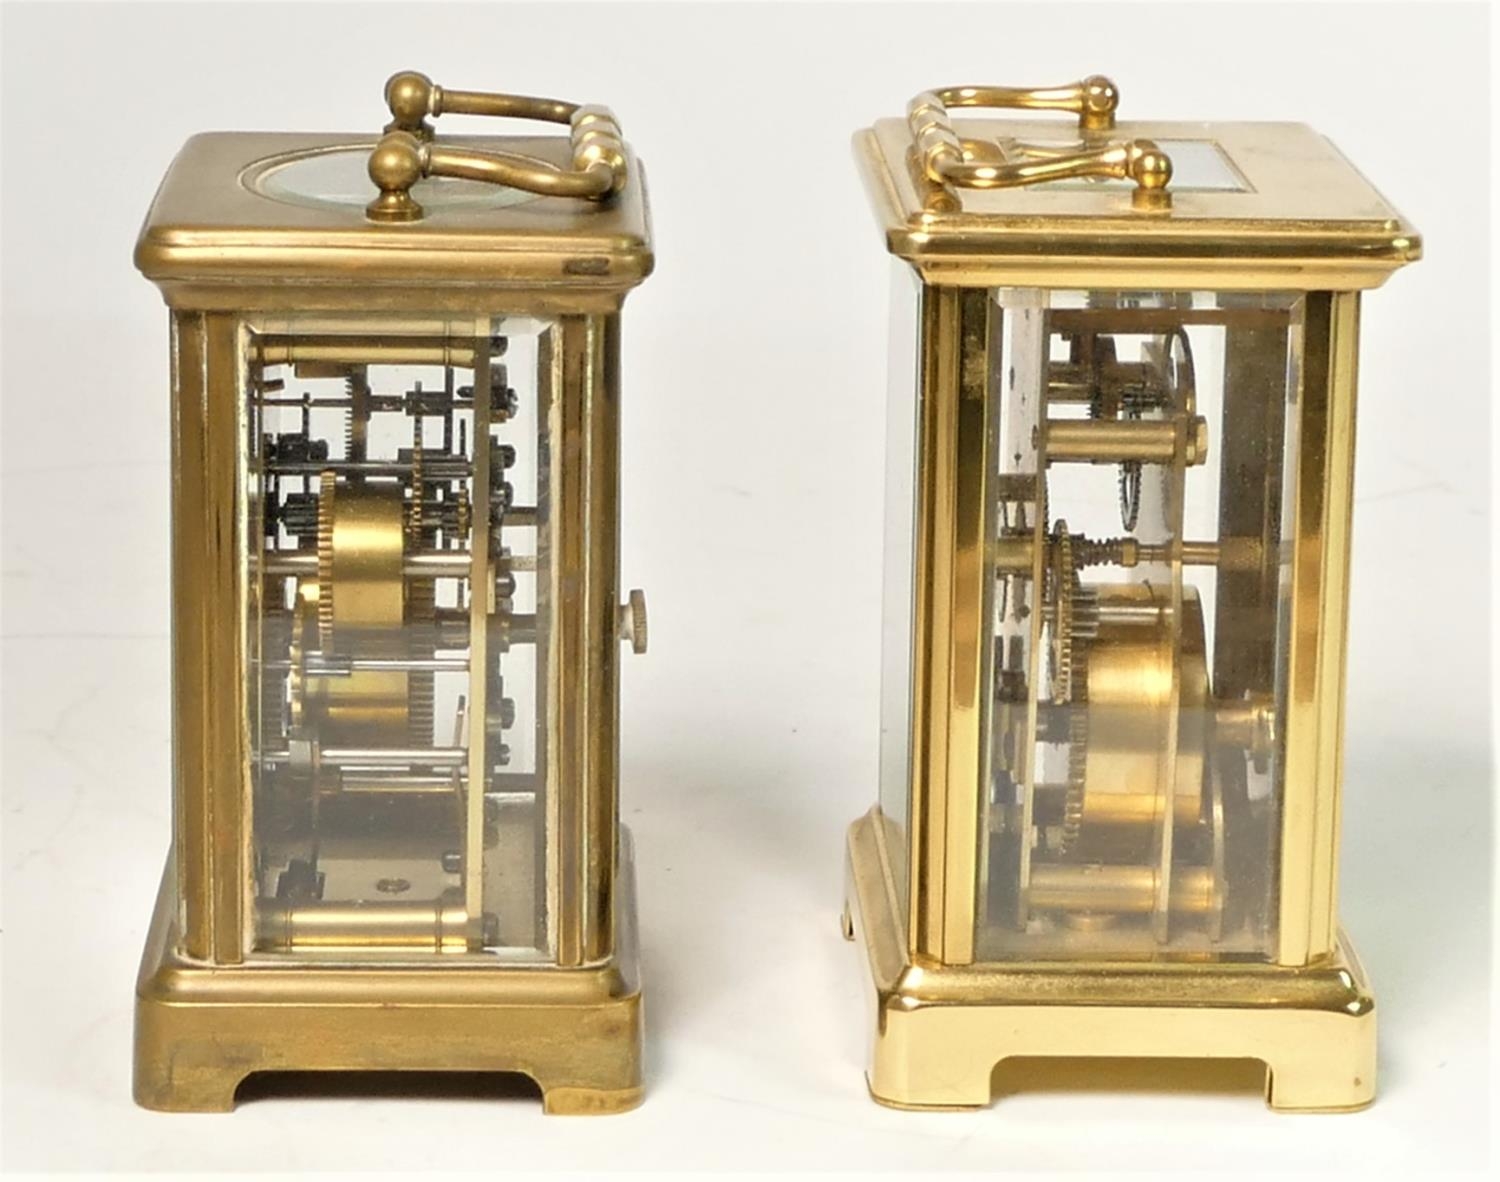 A Watches of Switzerland 8 day manual wind carriage clock 11cm, together with an unmarked manual - Image 4 of 4